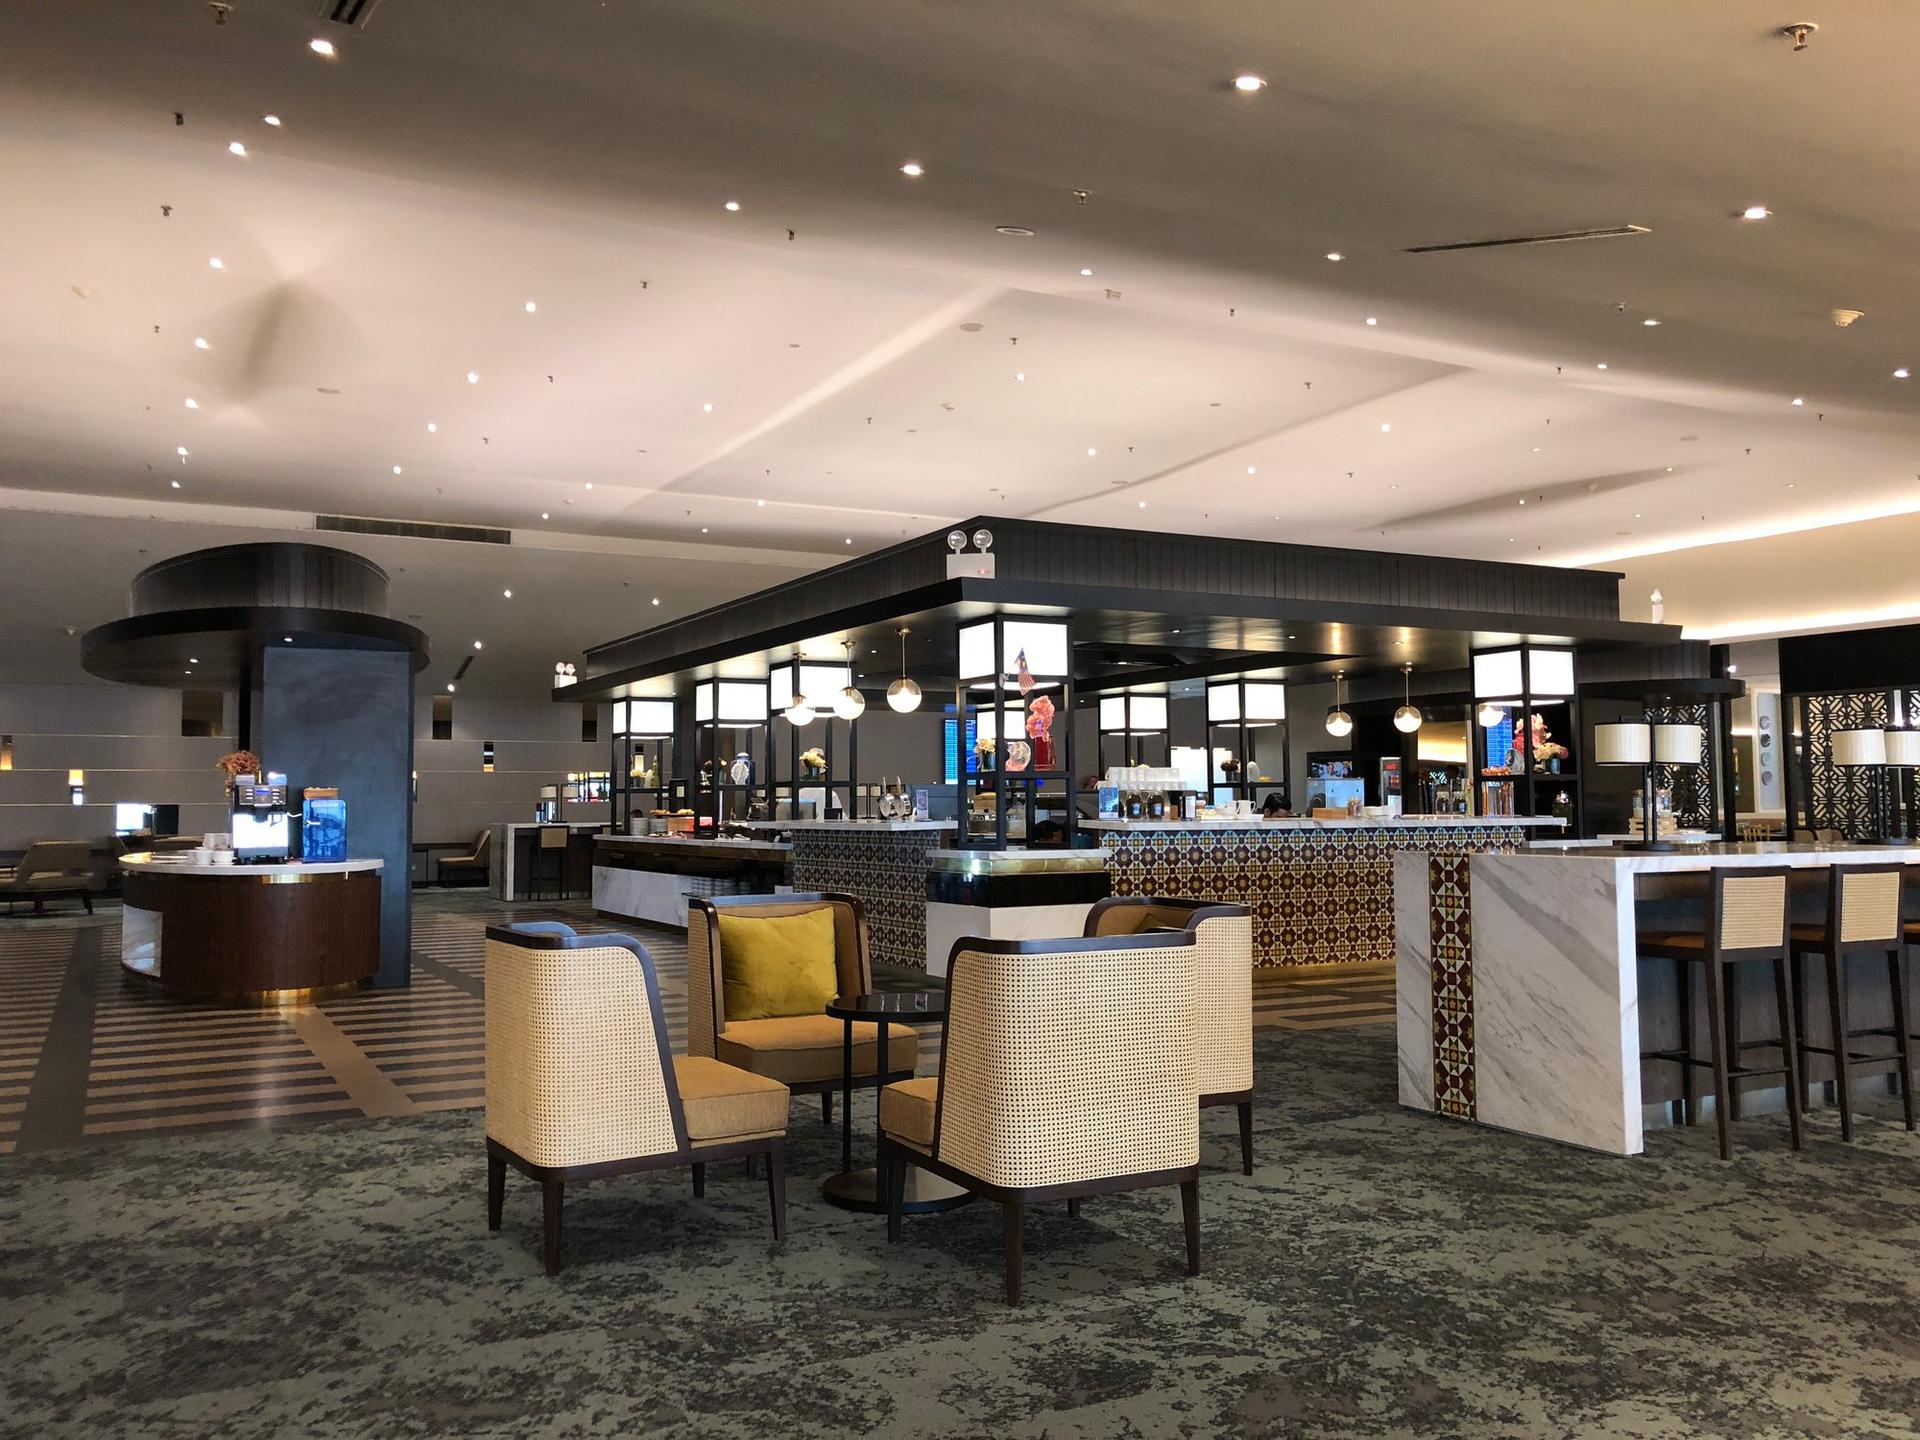 Malaysia Airlines Golden Business Class Lounge image 11 of 27